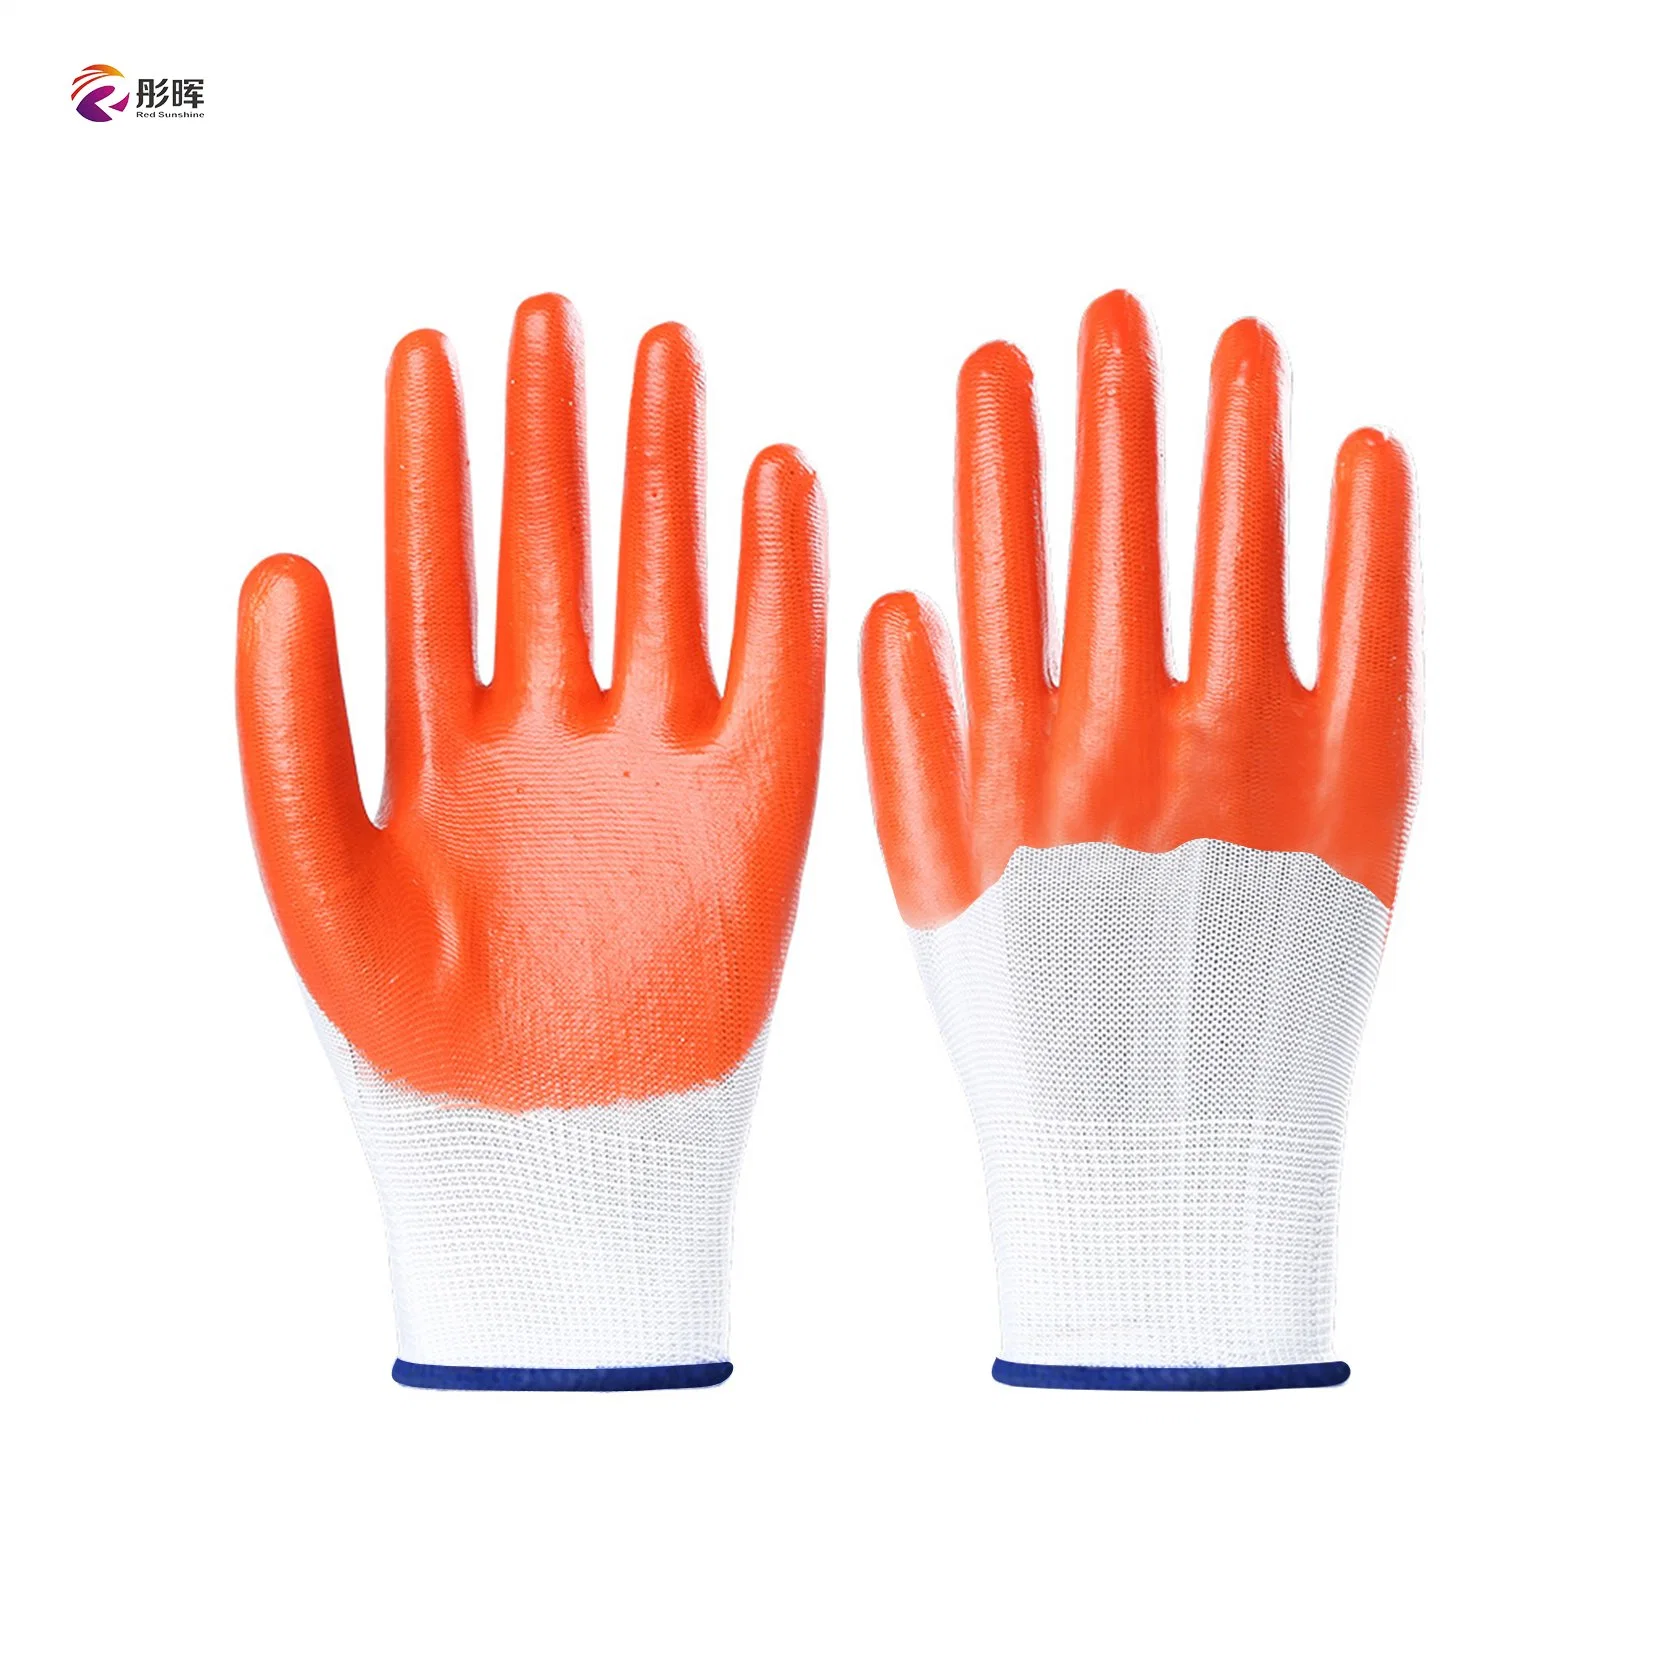 China Wholesale Heavy Duty Industrial Oil-Resistant Cotton Lining Orange PVC Rubber Fully Coated Safety Work Glove